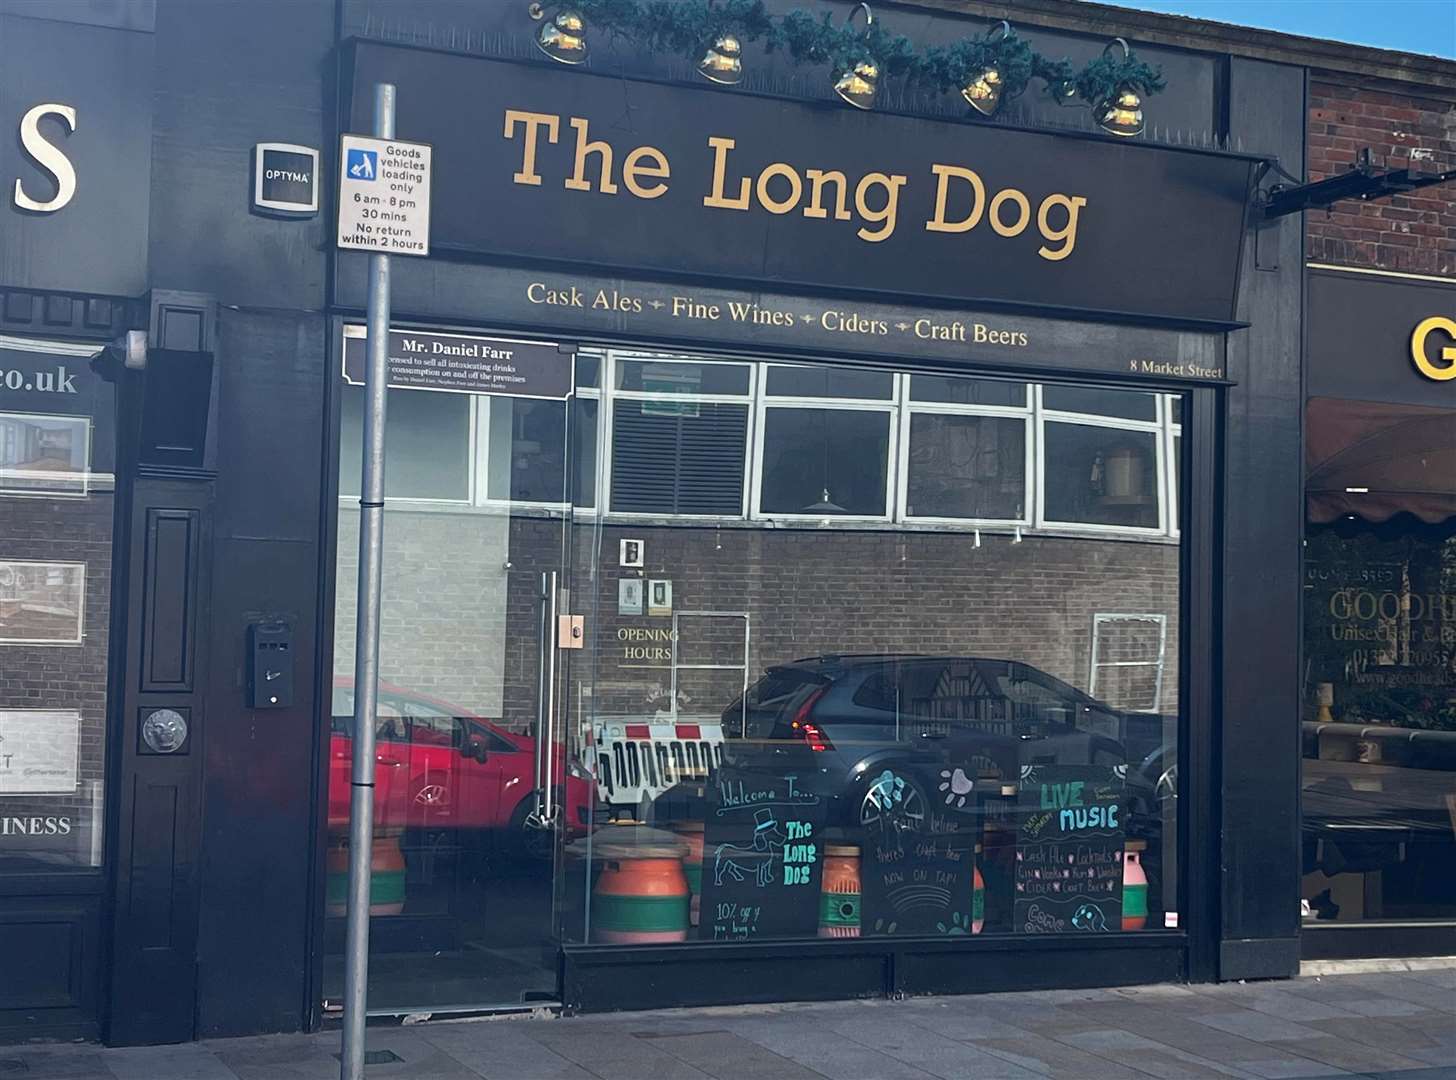 The Long Dog pub in Dartford has had its licence revoked